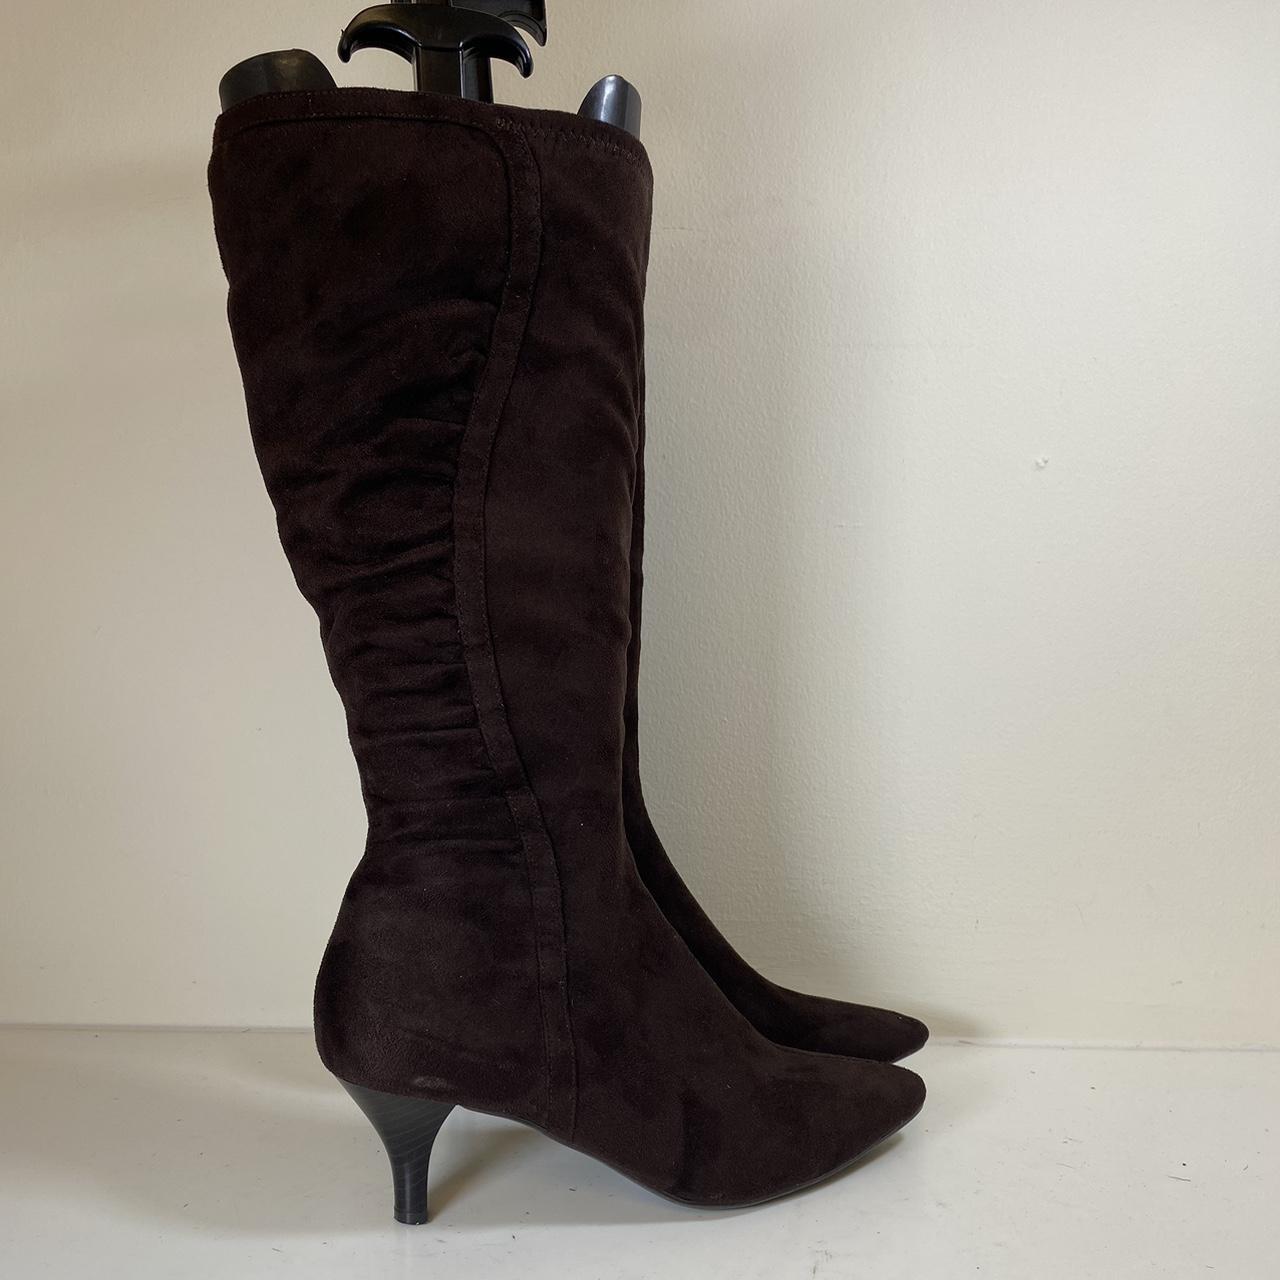 Impo Women's Brown and Black Boots (4)